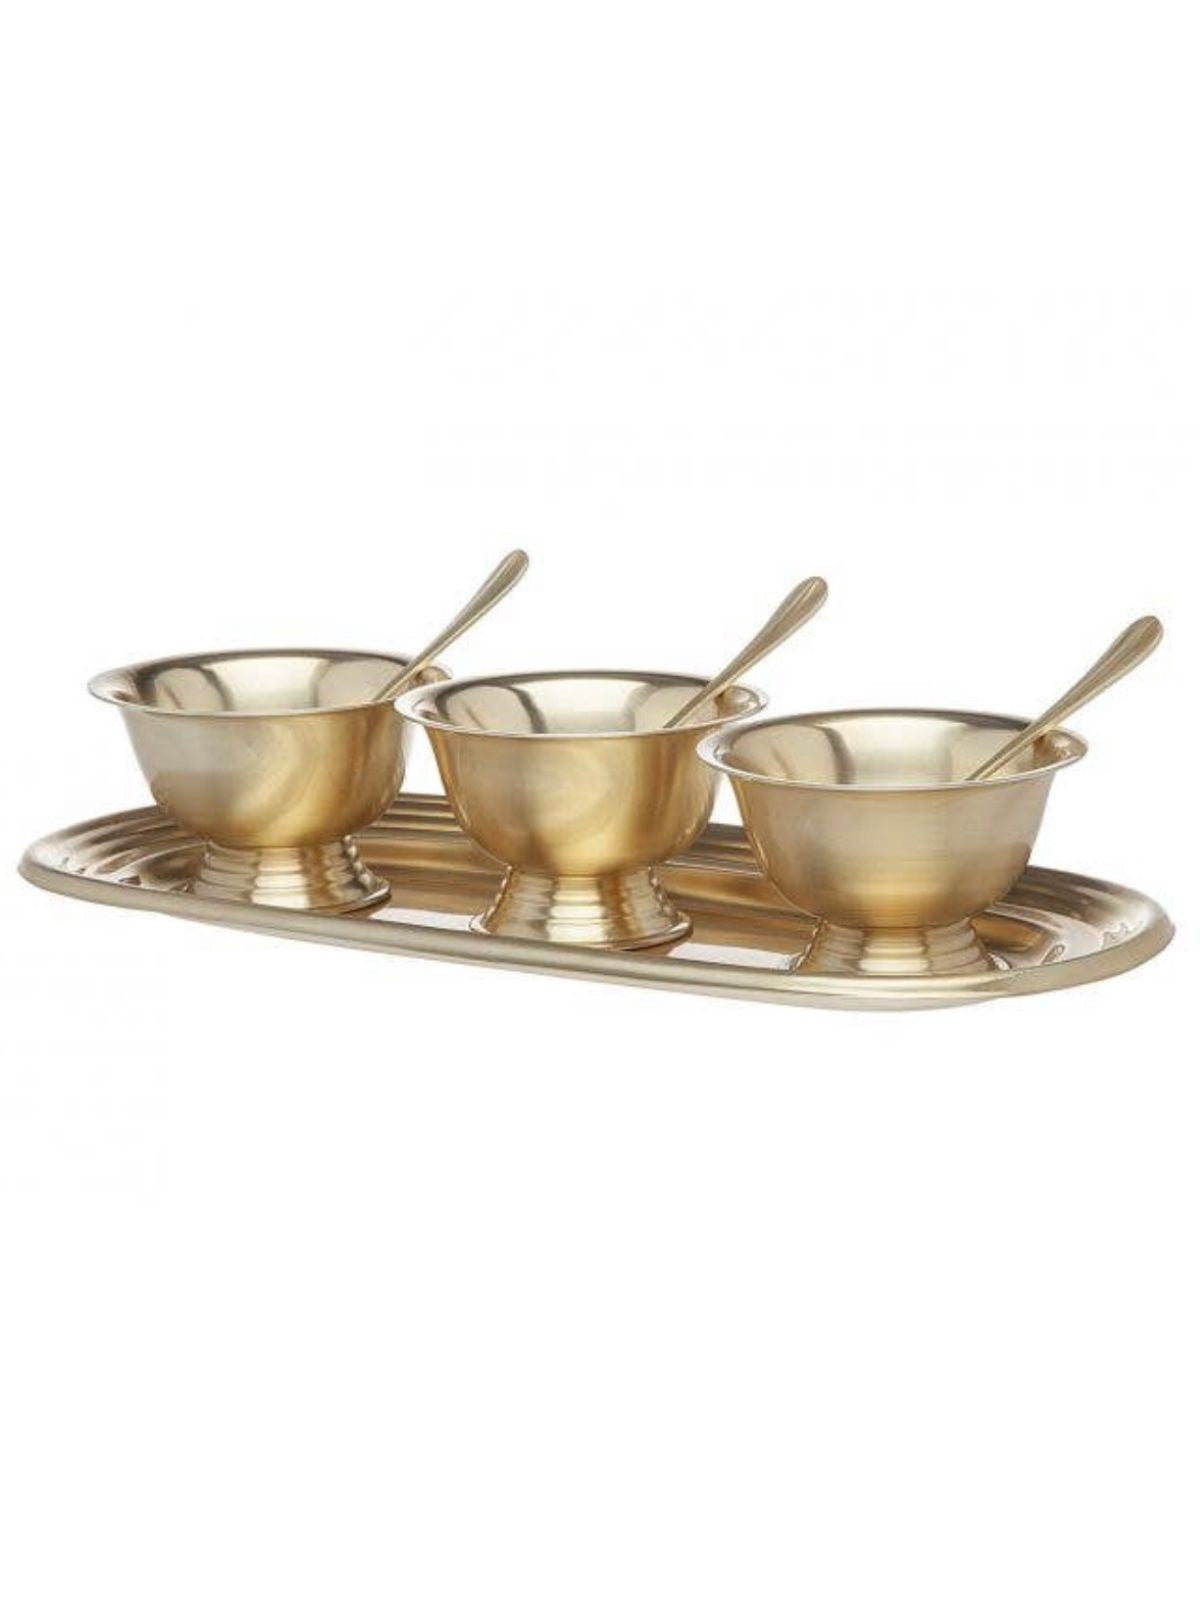 Revere Champagne Gold 3 Bowl Set with Tray Sold by KYA Home Decor.